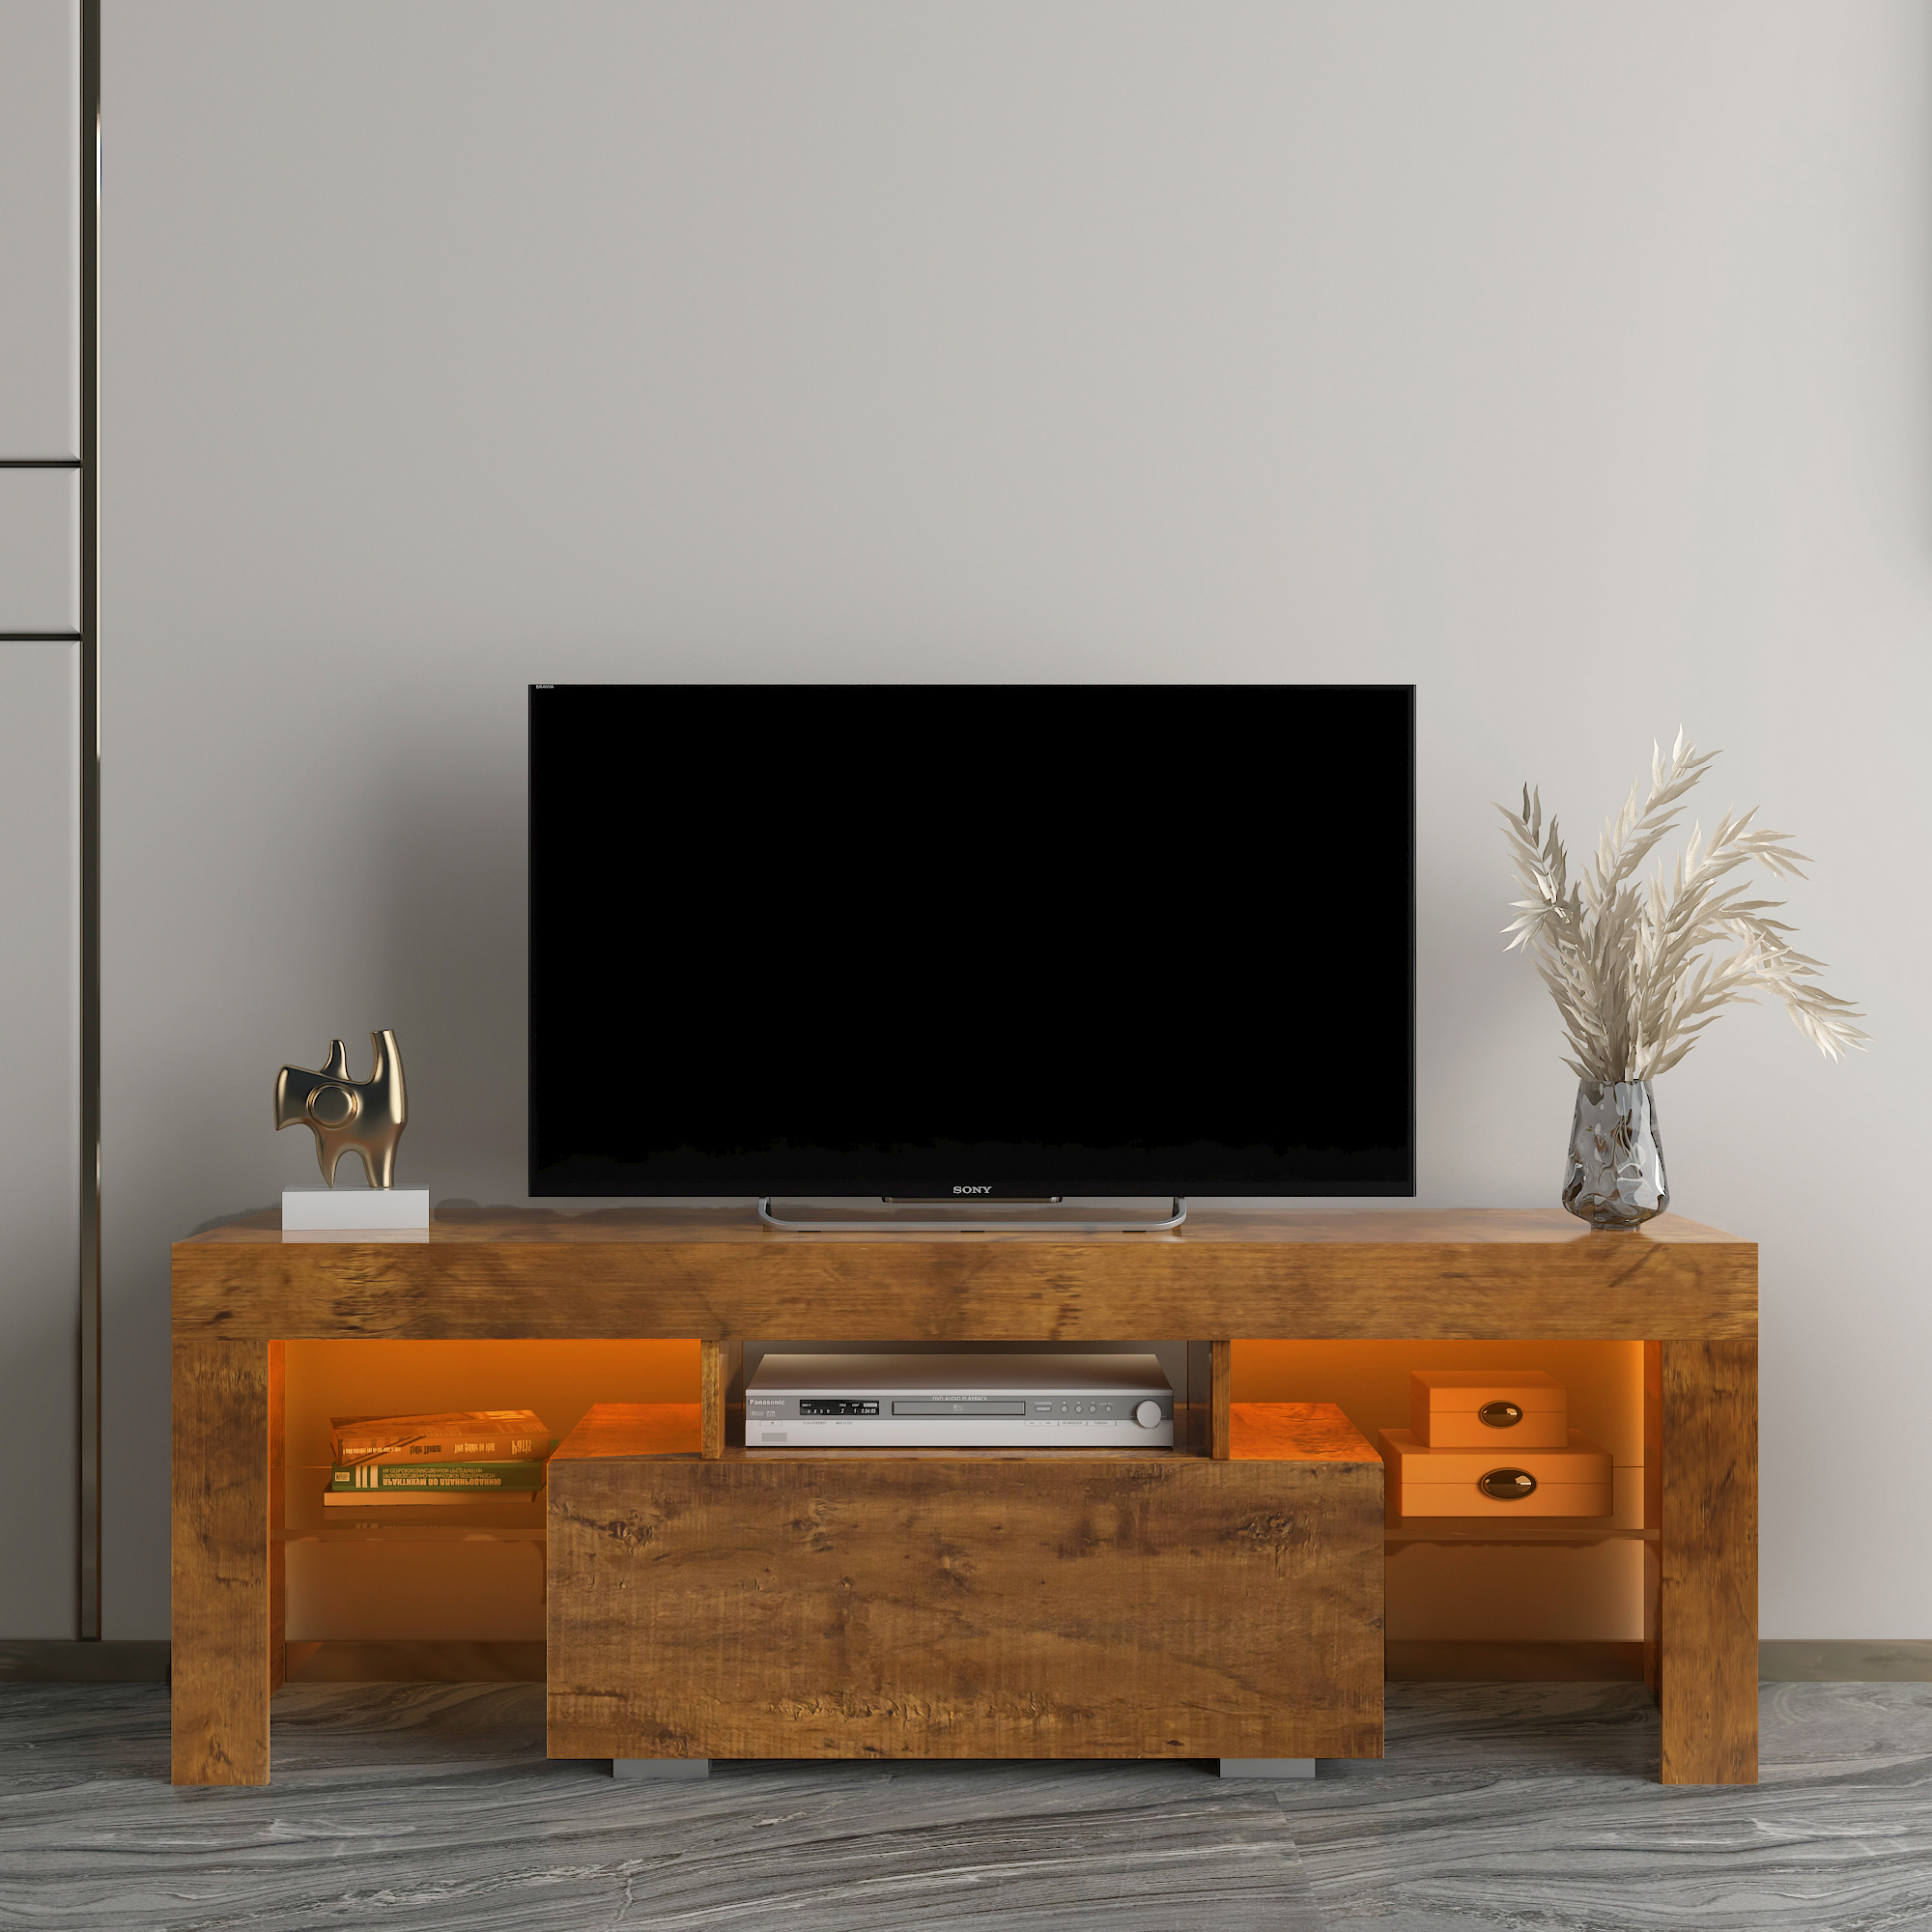 TV Stand with LED RGB Lights,Flat Screen TV Cabinet, Gaming Consoles - in Lounge Room, Living Room,FIR WOOD-Boyel Living